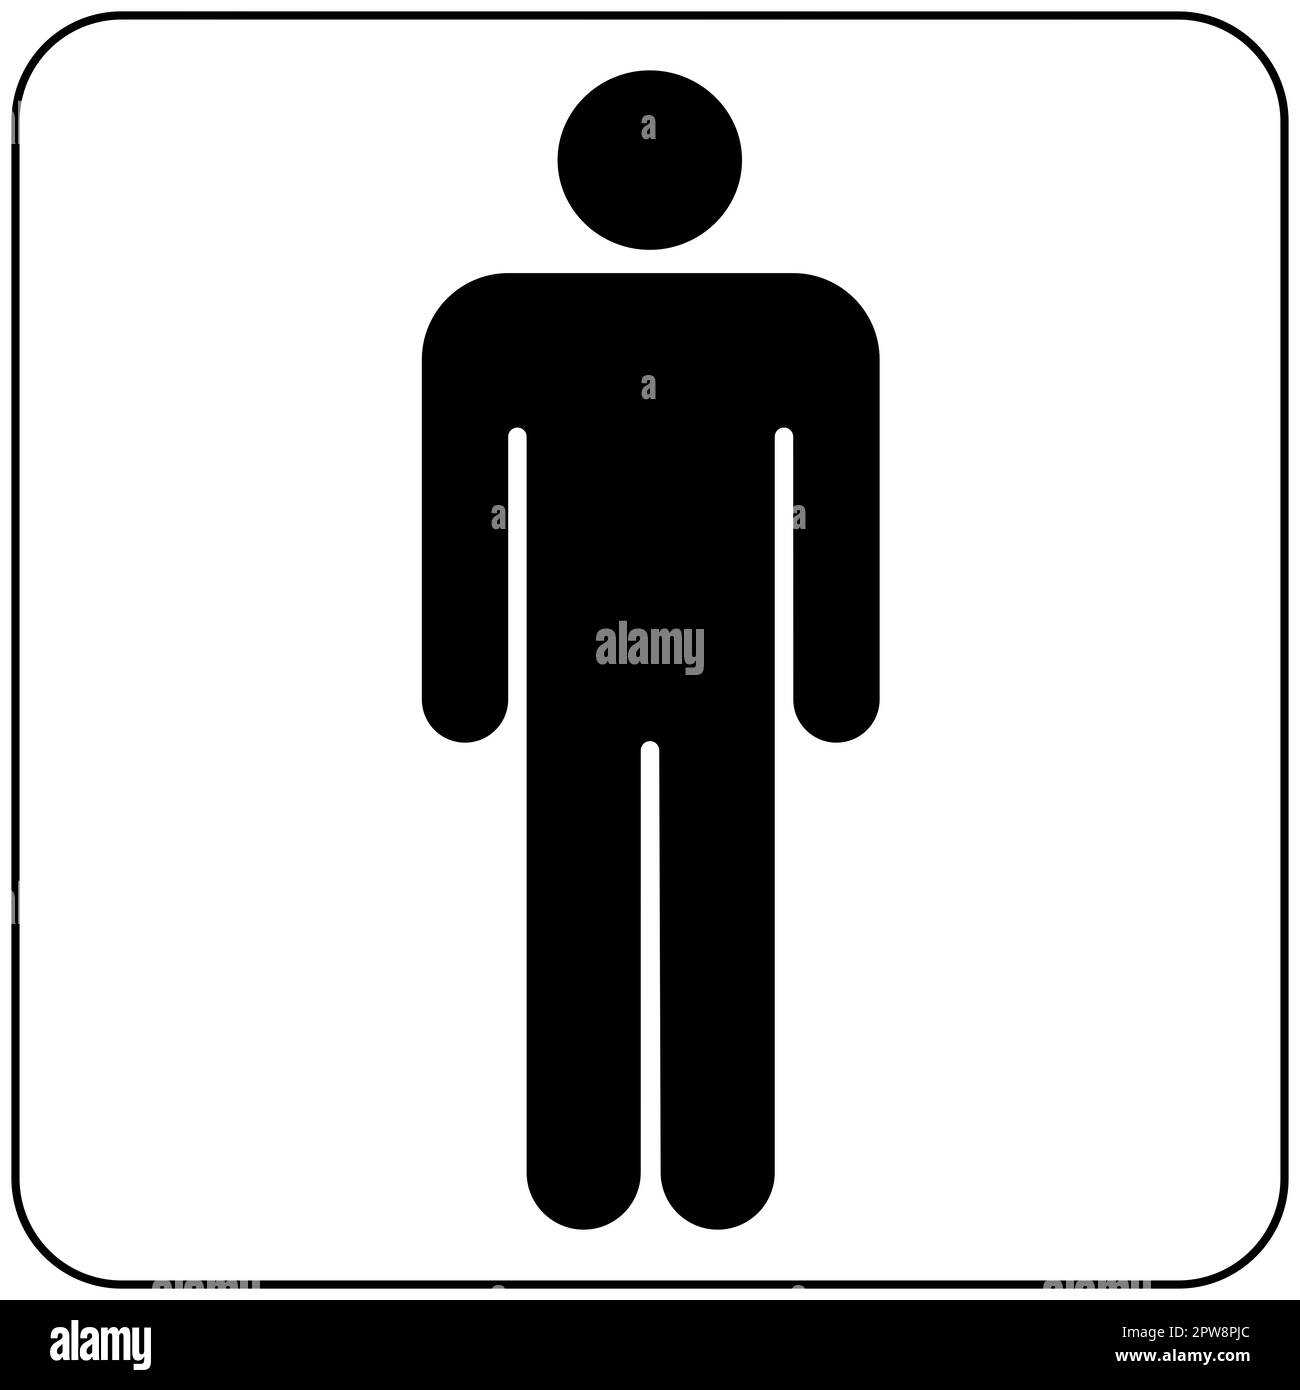 Department of Transportation male toilets pictogram Stock Photo